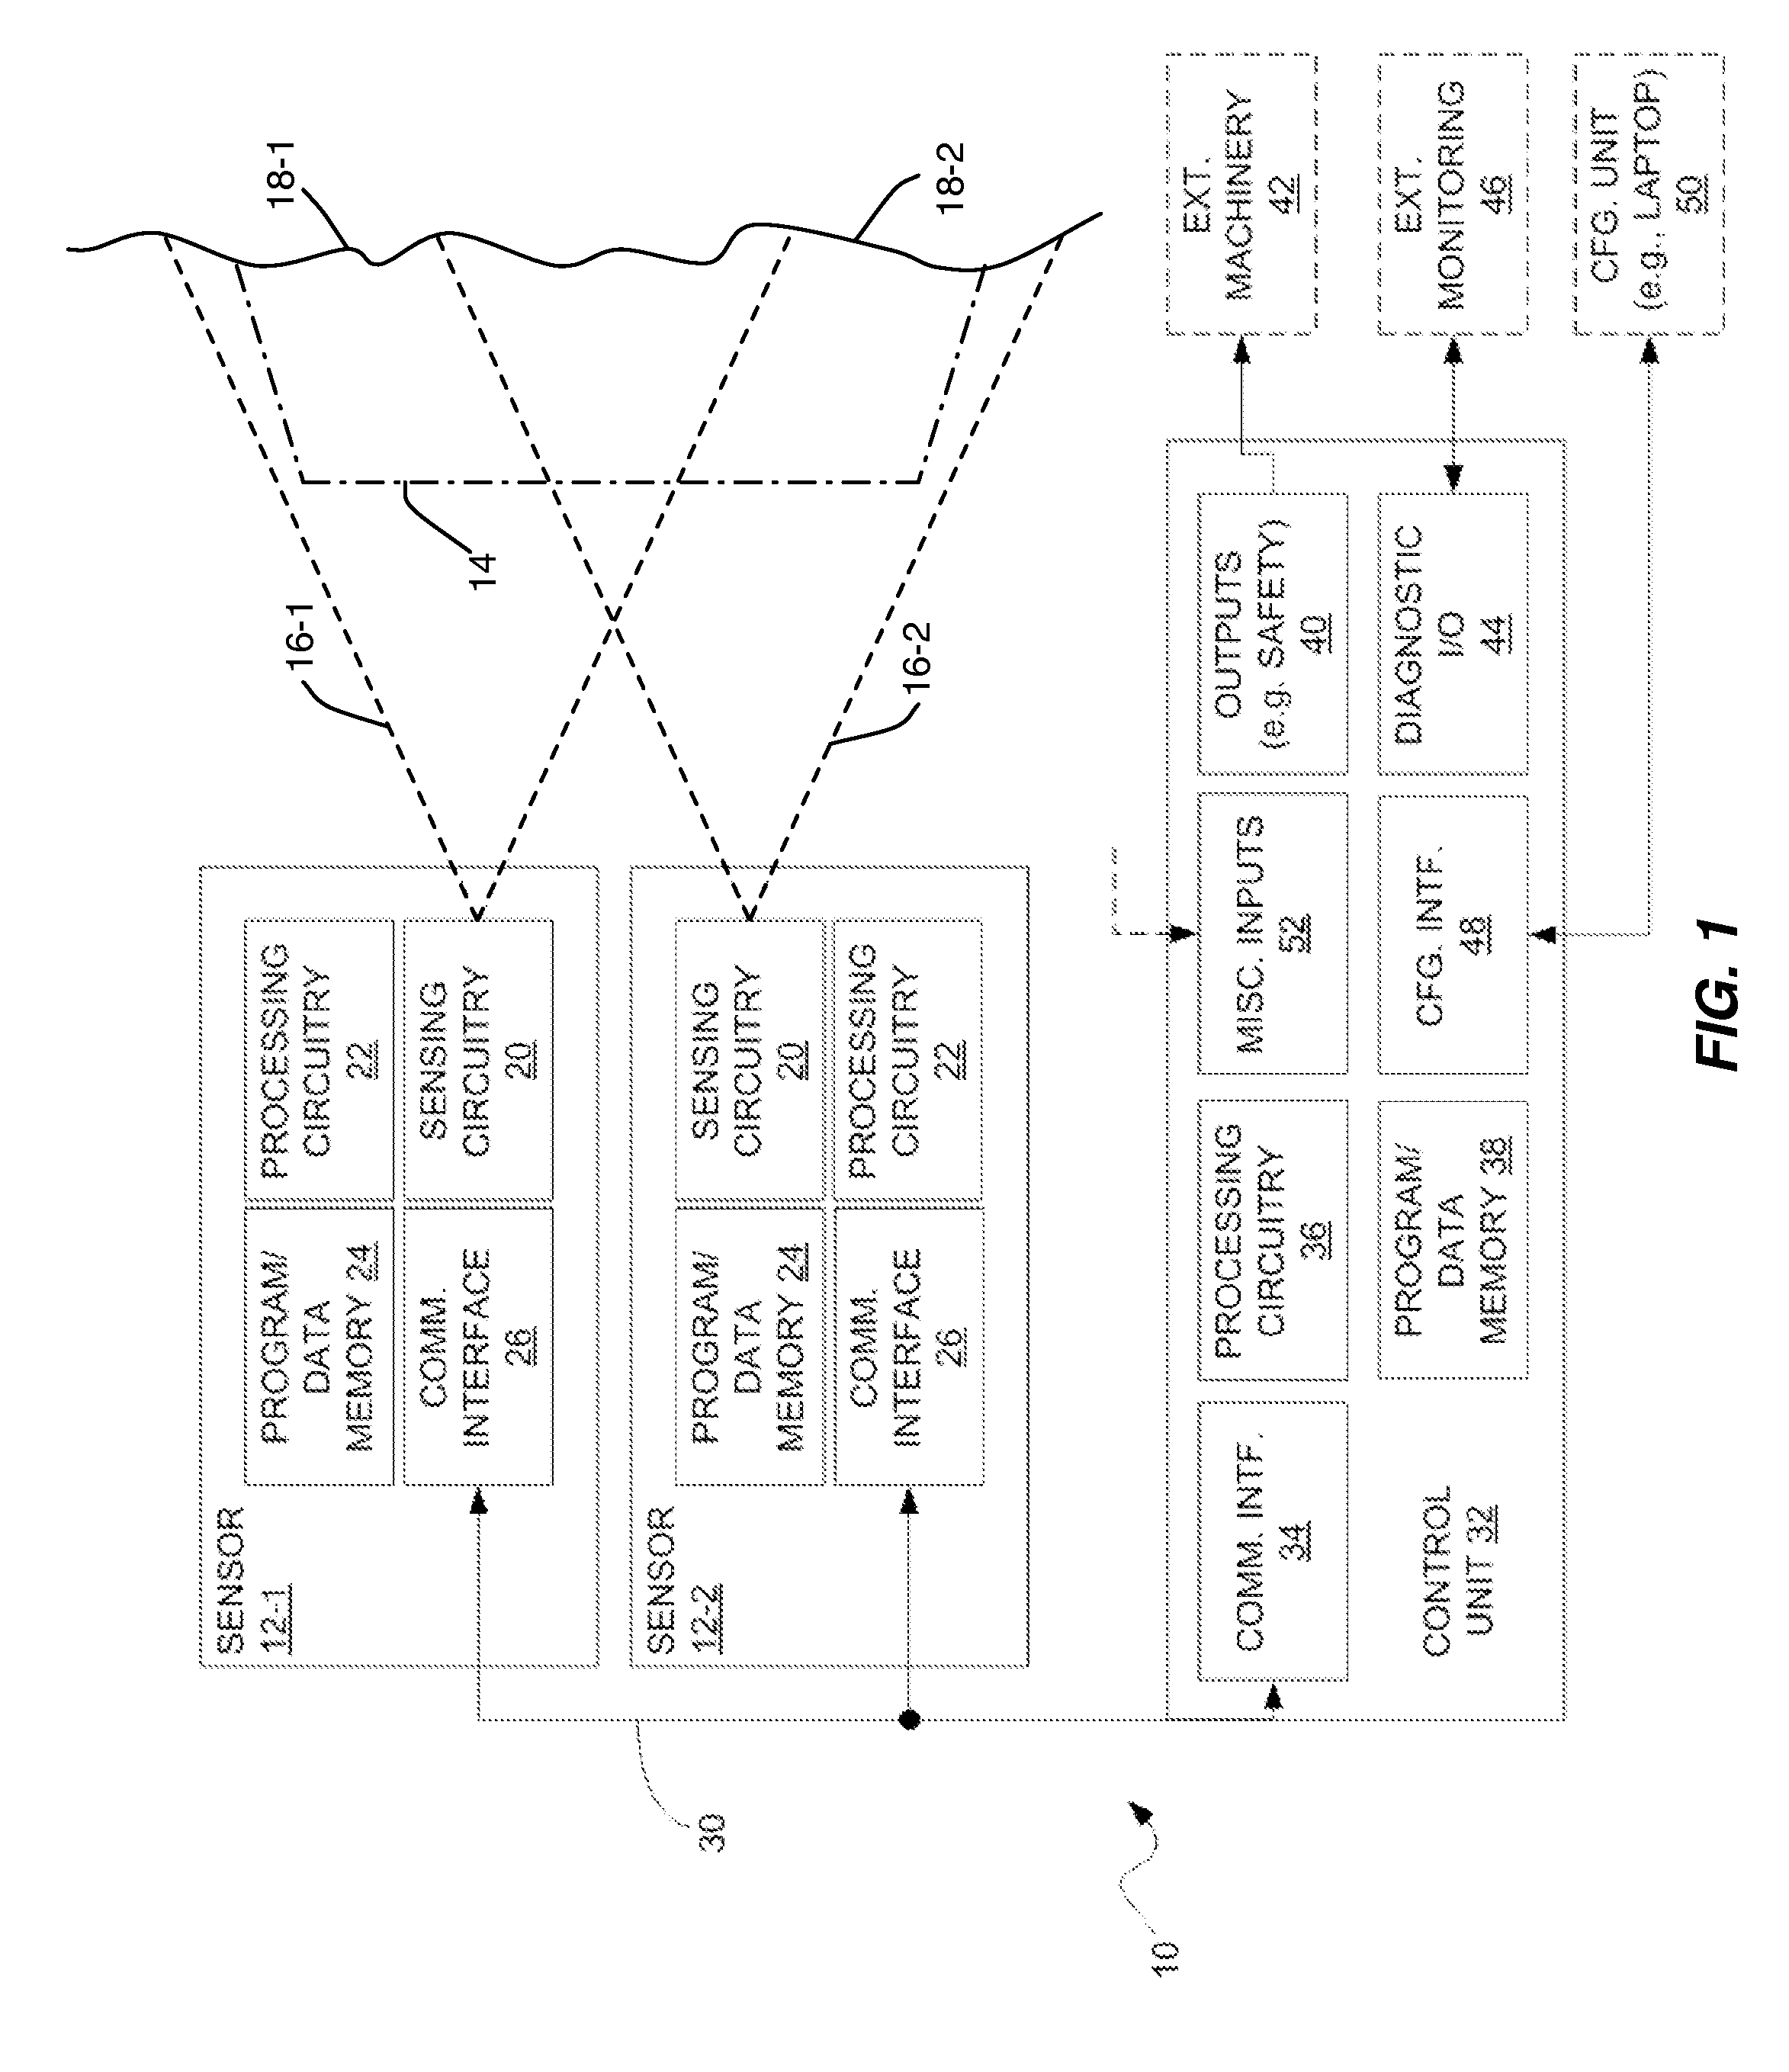 Method and Apparatus for Monitoring Zones